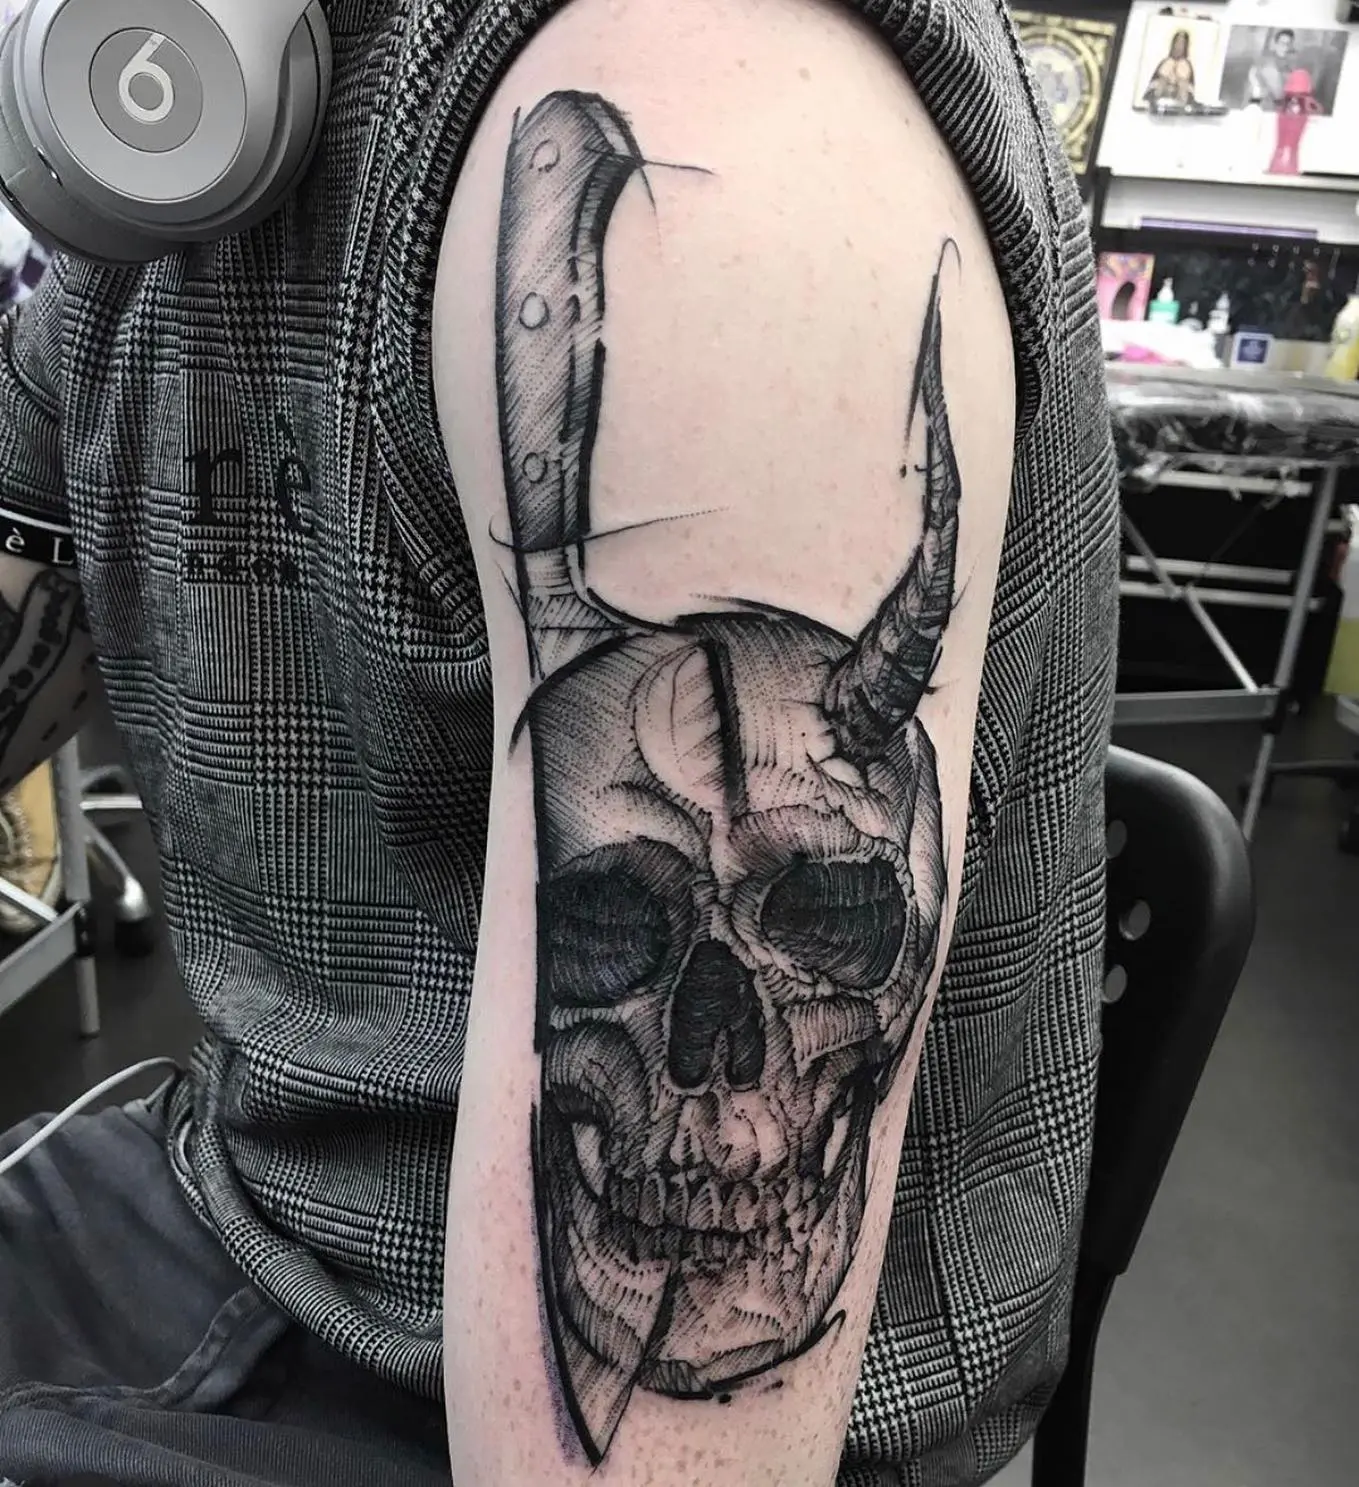 Epic new piece from resident @manny.tattoos 
You can find manny every Monday, Tuesday and Wednesday for all your tattoo needs!! ————
————
️01315582974 artwork@studioxiii.tattoo studioxiii tattoos tattooed tattooflash blackworkers bandg realism realistictattoo skull skinartmag skulltattoo lion liontattoo tattooartist edinburghtattooartist edinburghtattoo girltattoo blackclaw uktta ttt bishoprotary ukbta skindeep txtooing tattoomediaink thebesttattooartist tattoosnob tattooartistic